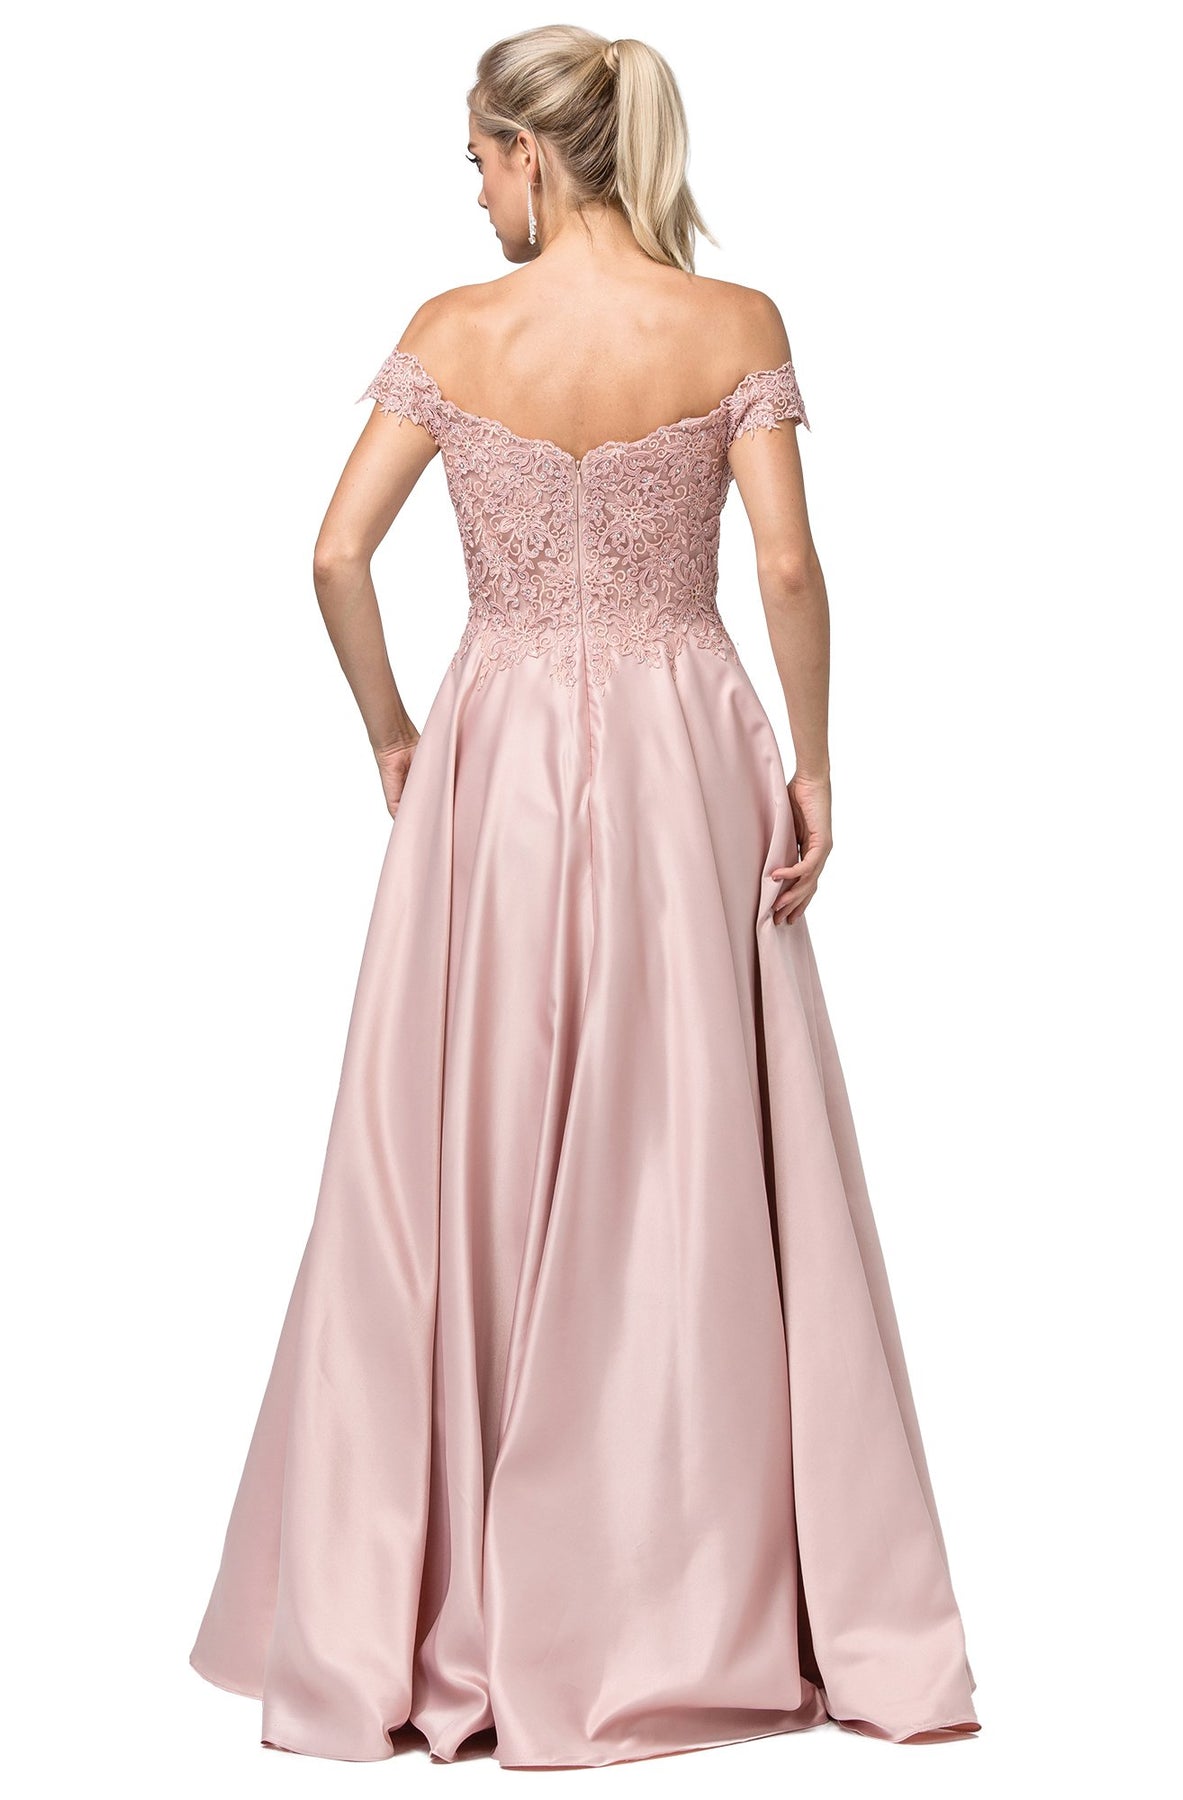 Dancing Queen - 2837 Embroidered Off-Shoulder Long A-line Dress In Pink